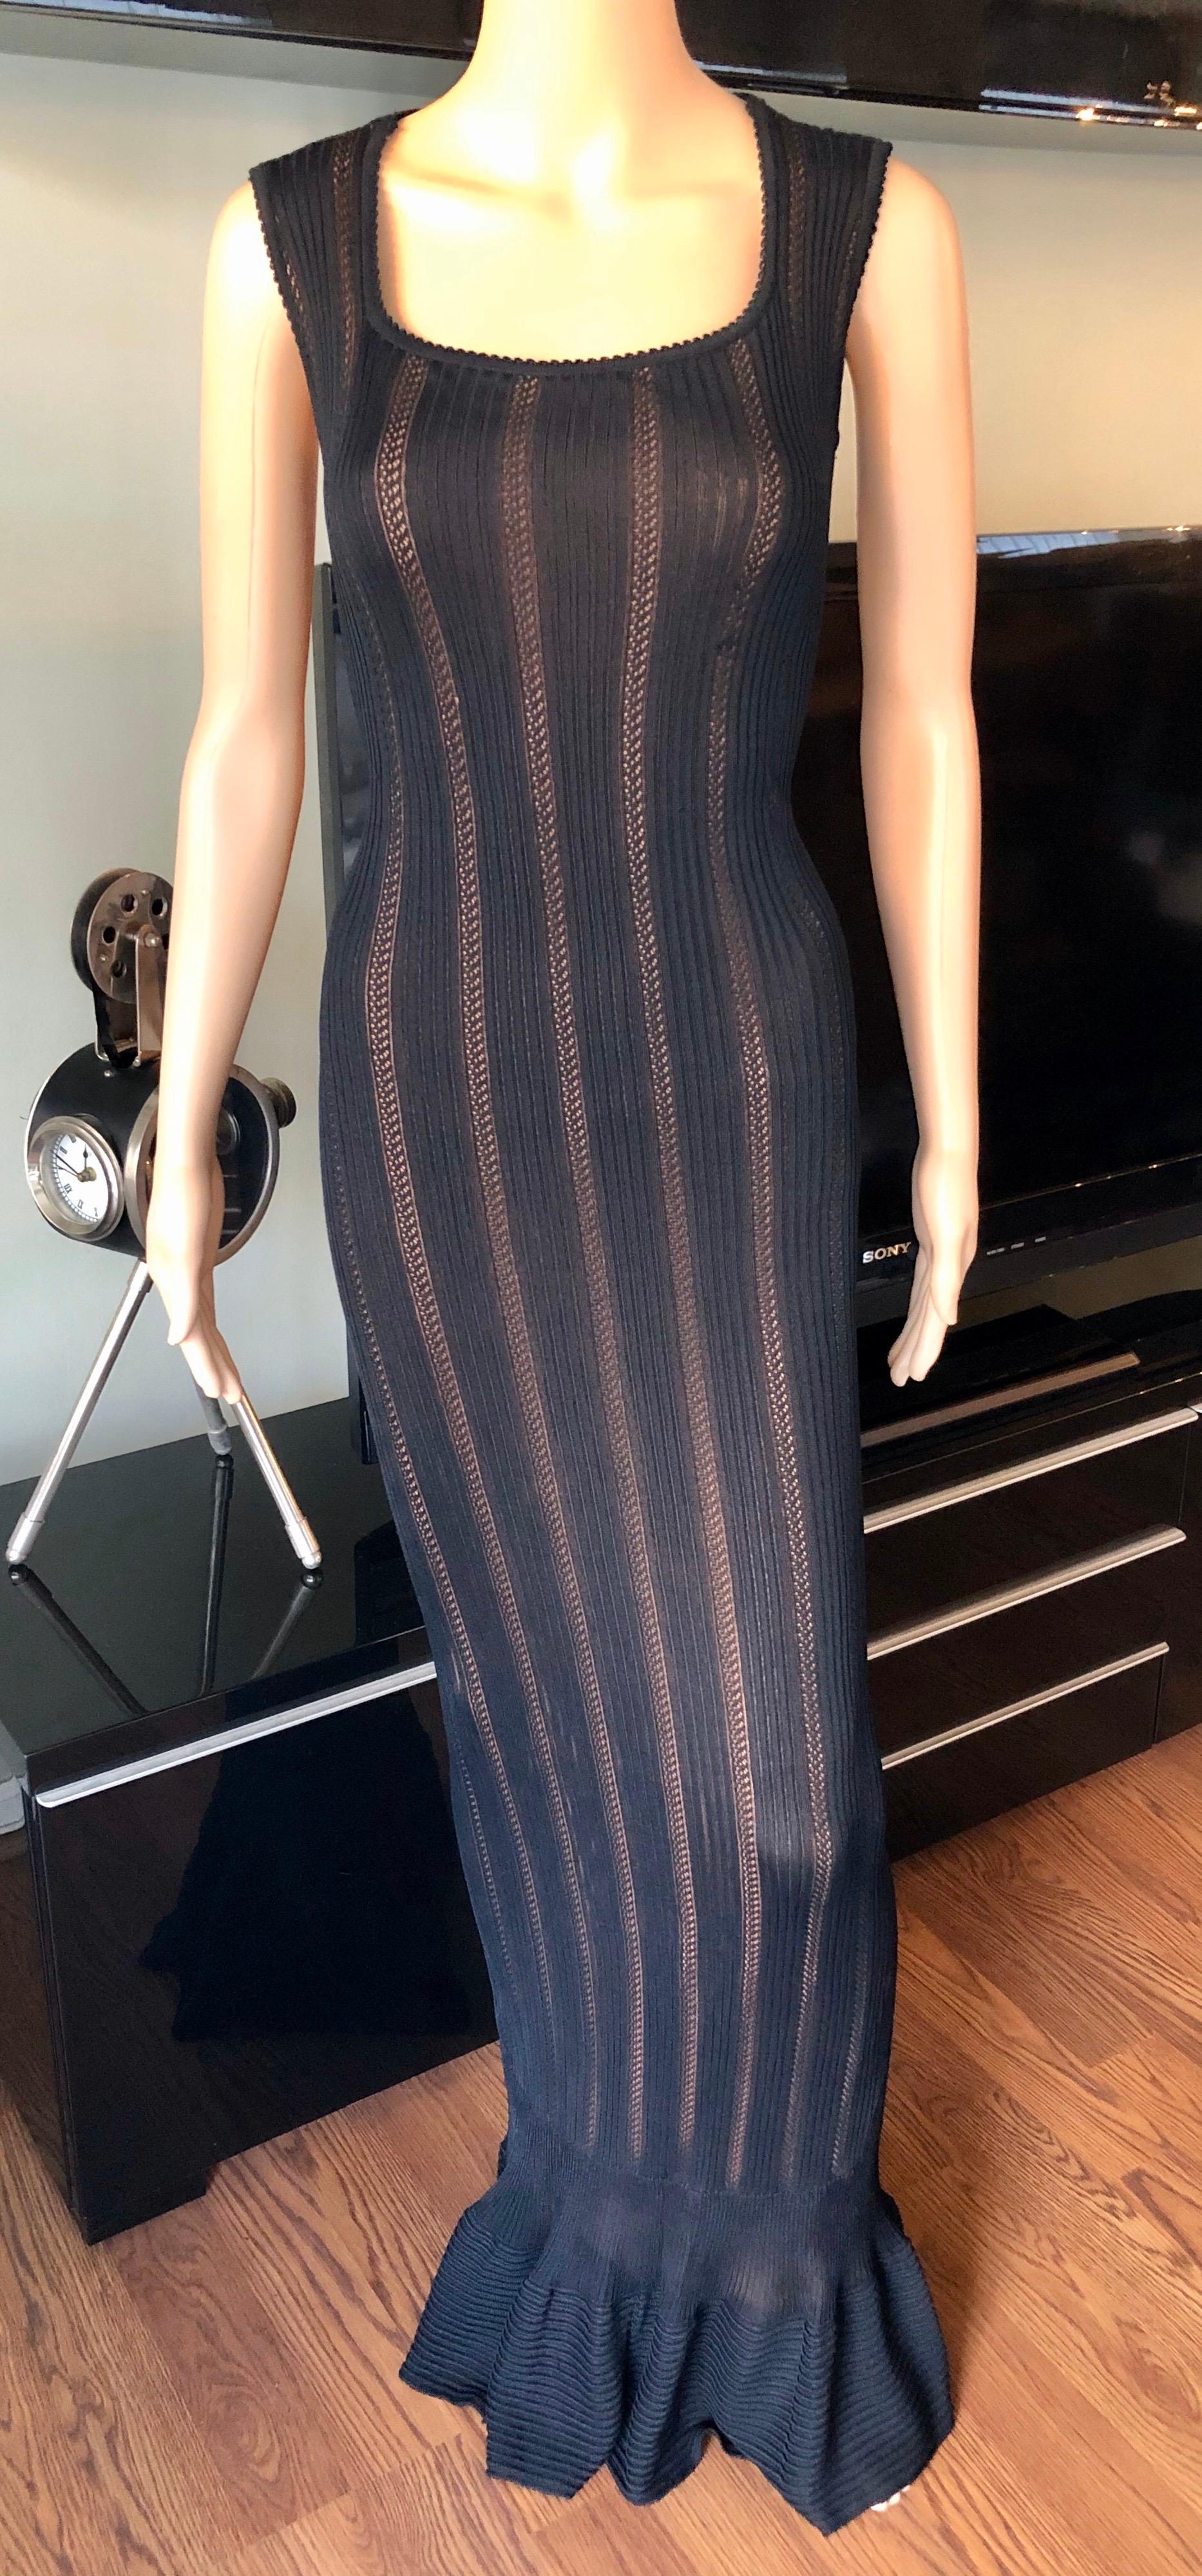 Azzedine Alaia Vintage 1990's Knit Bodycon Black Dress Gown Size M

Alaïa knit semi sheer sleeveless knit maxi dress with nude slip, scoop neck and zip closure at back.